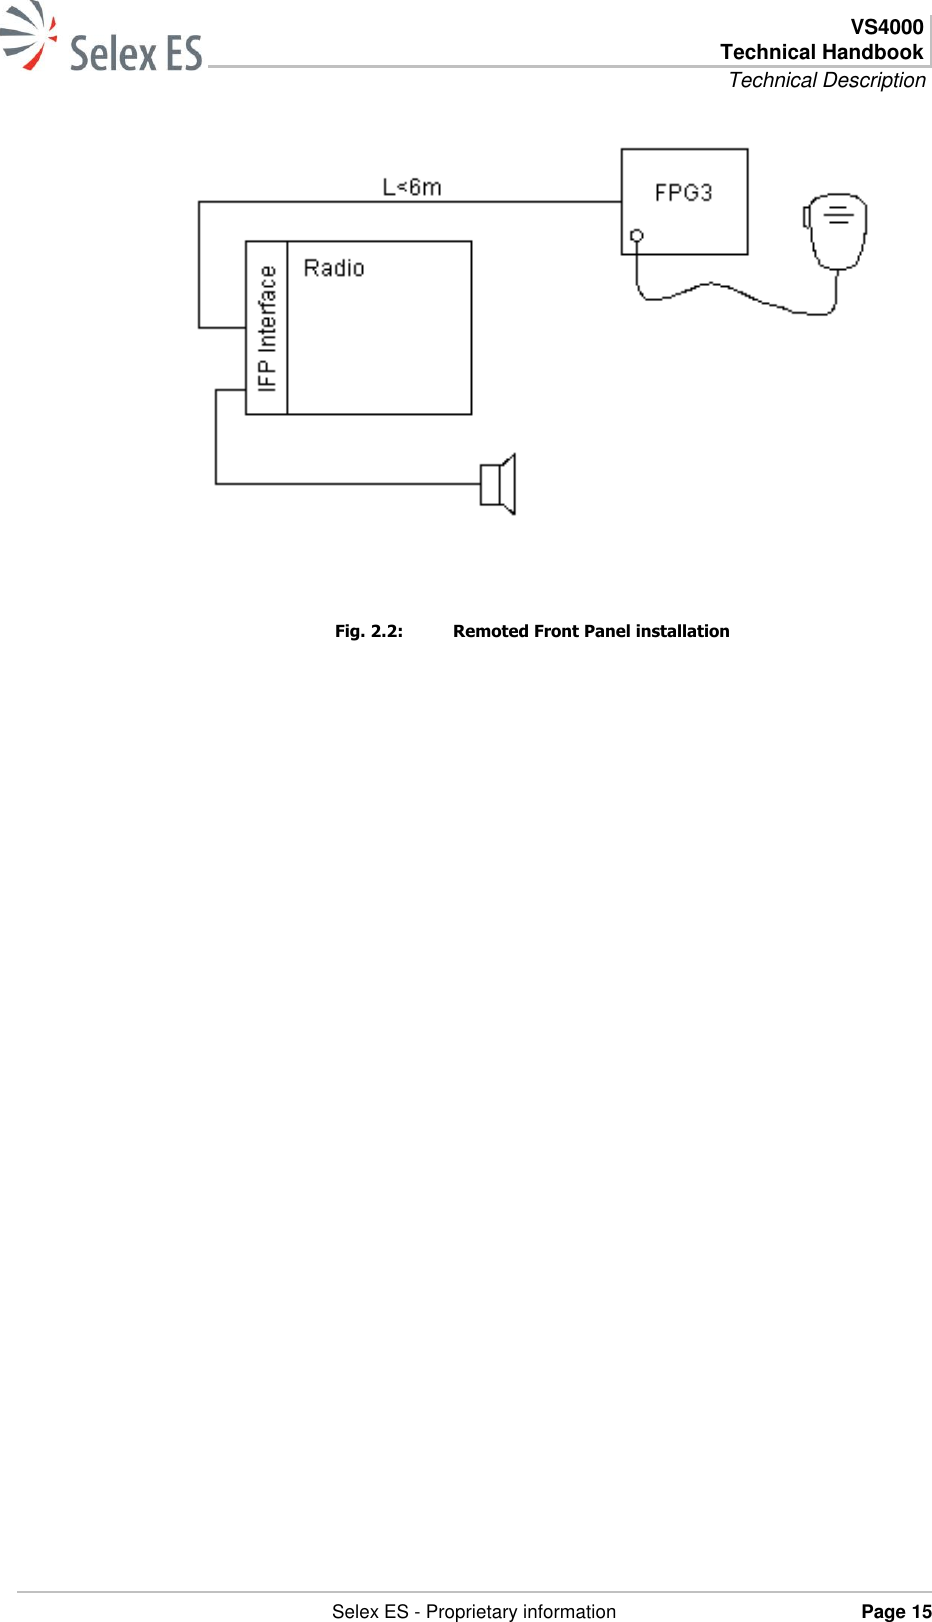  VS4000 Technical Handbook Technical Description   Selex ES - Proprietary information Page 15     Fig. 2.2:  Remoted Front Panel installation  